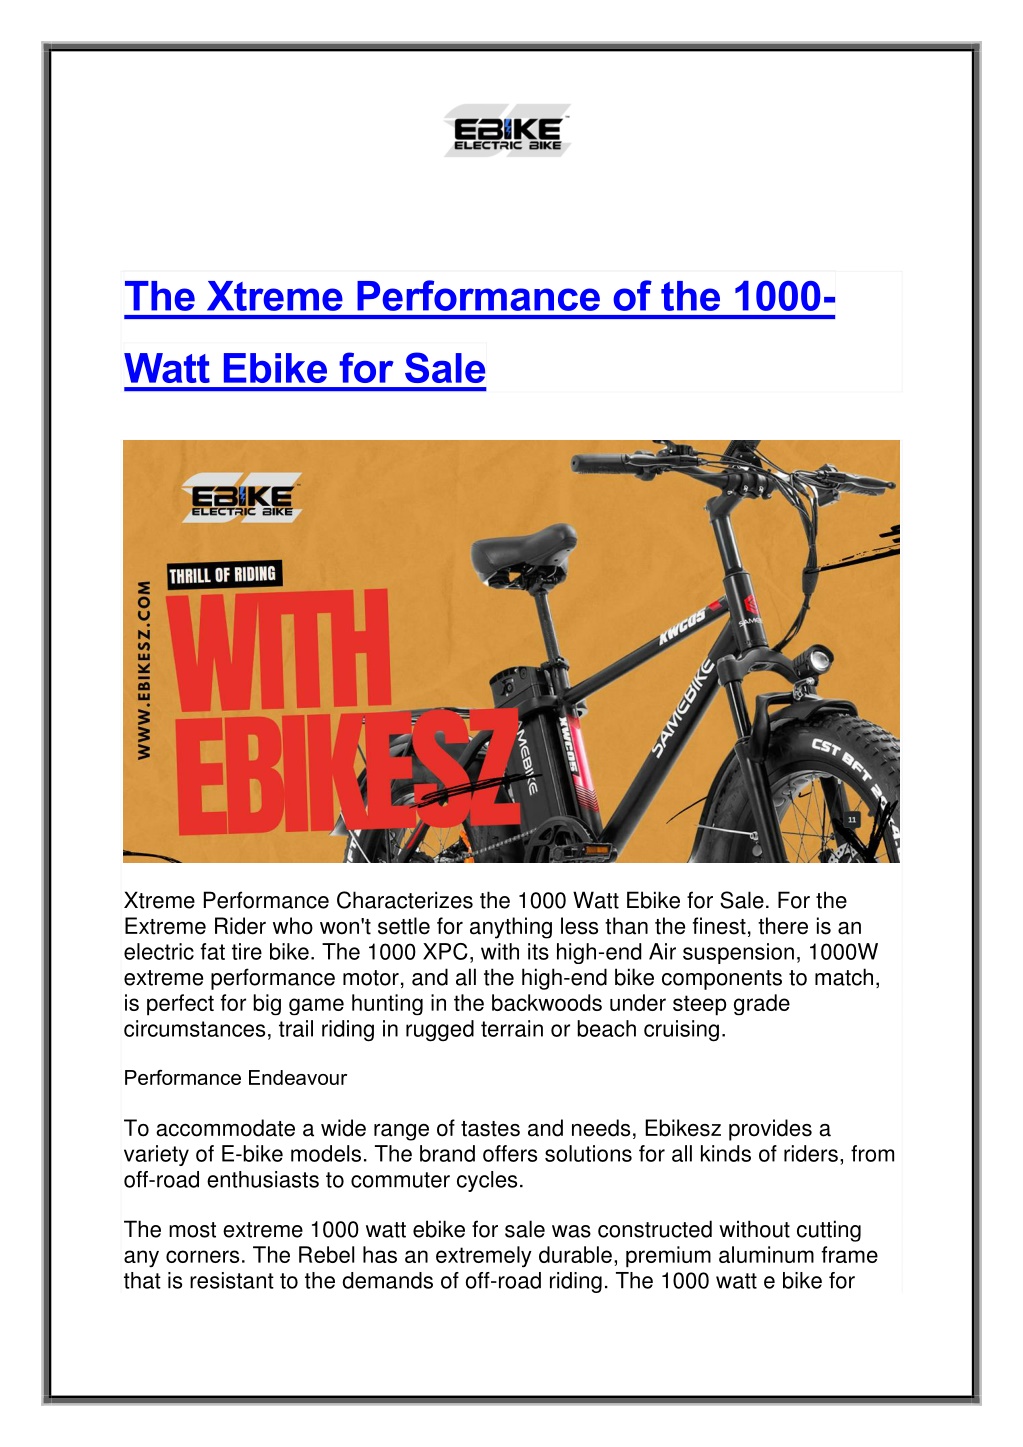 the xtreme performance of the 1000 l.w